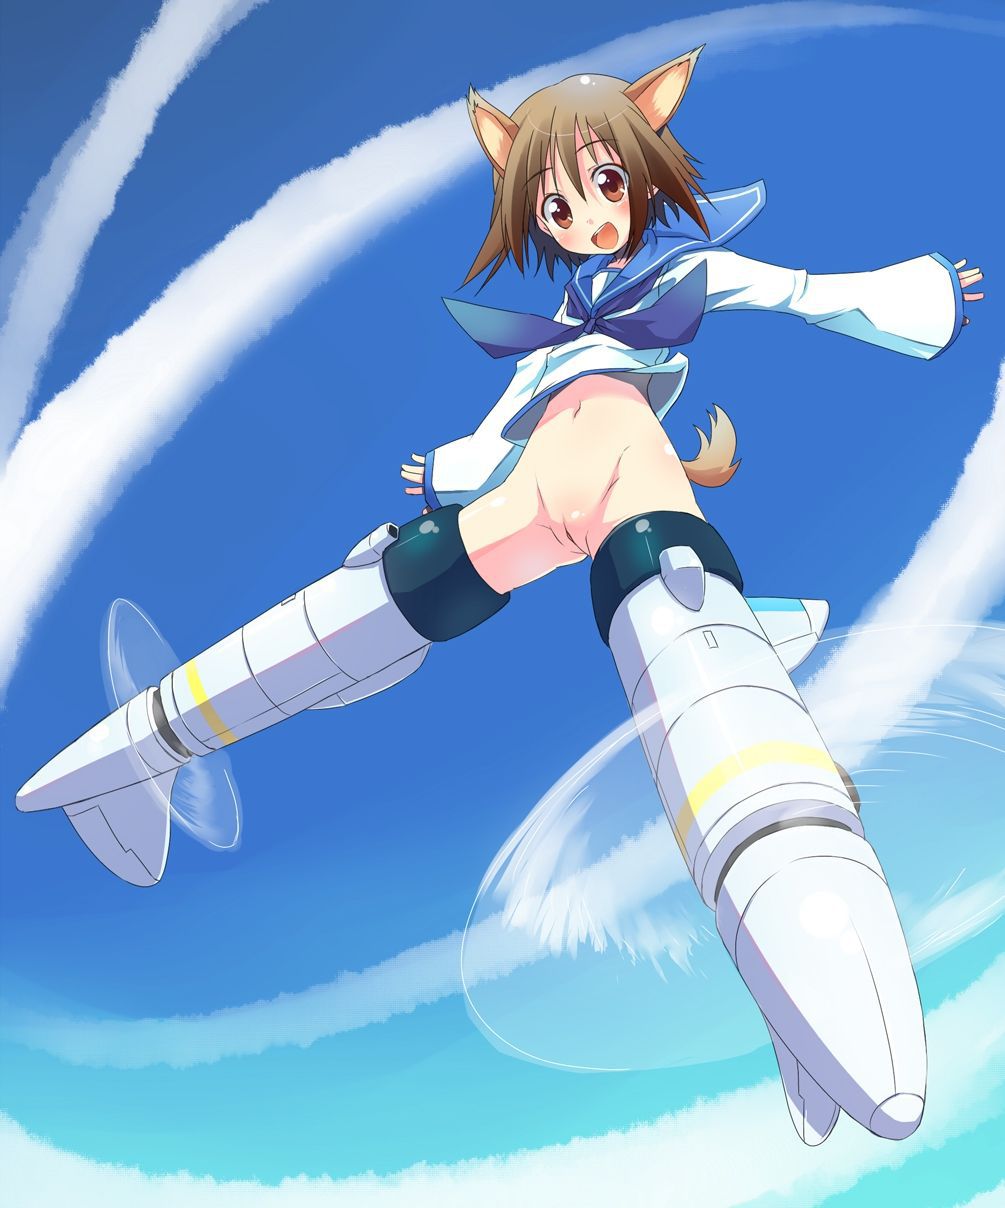 Gather those who want to nudge with erotic images of Strike Witches! 9